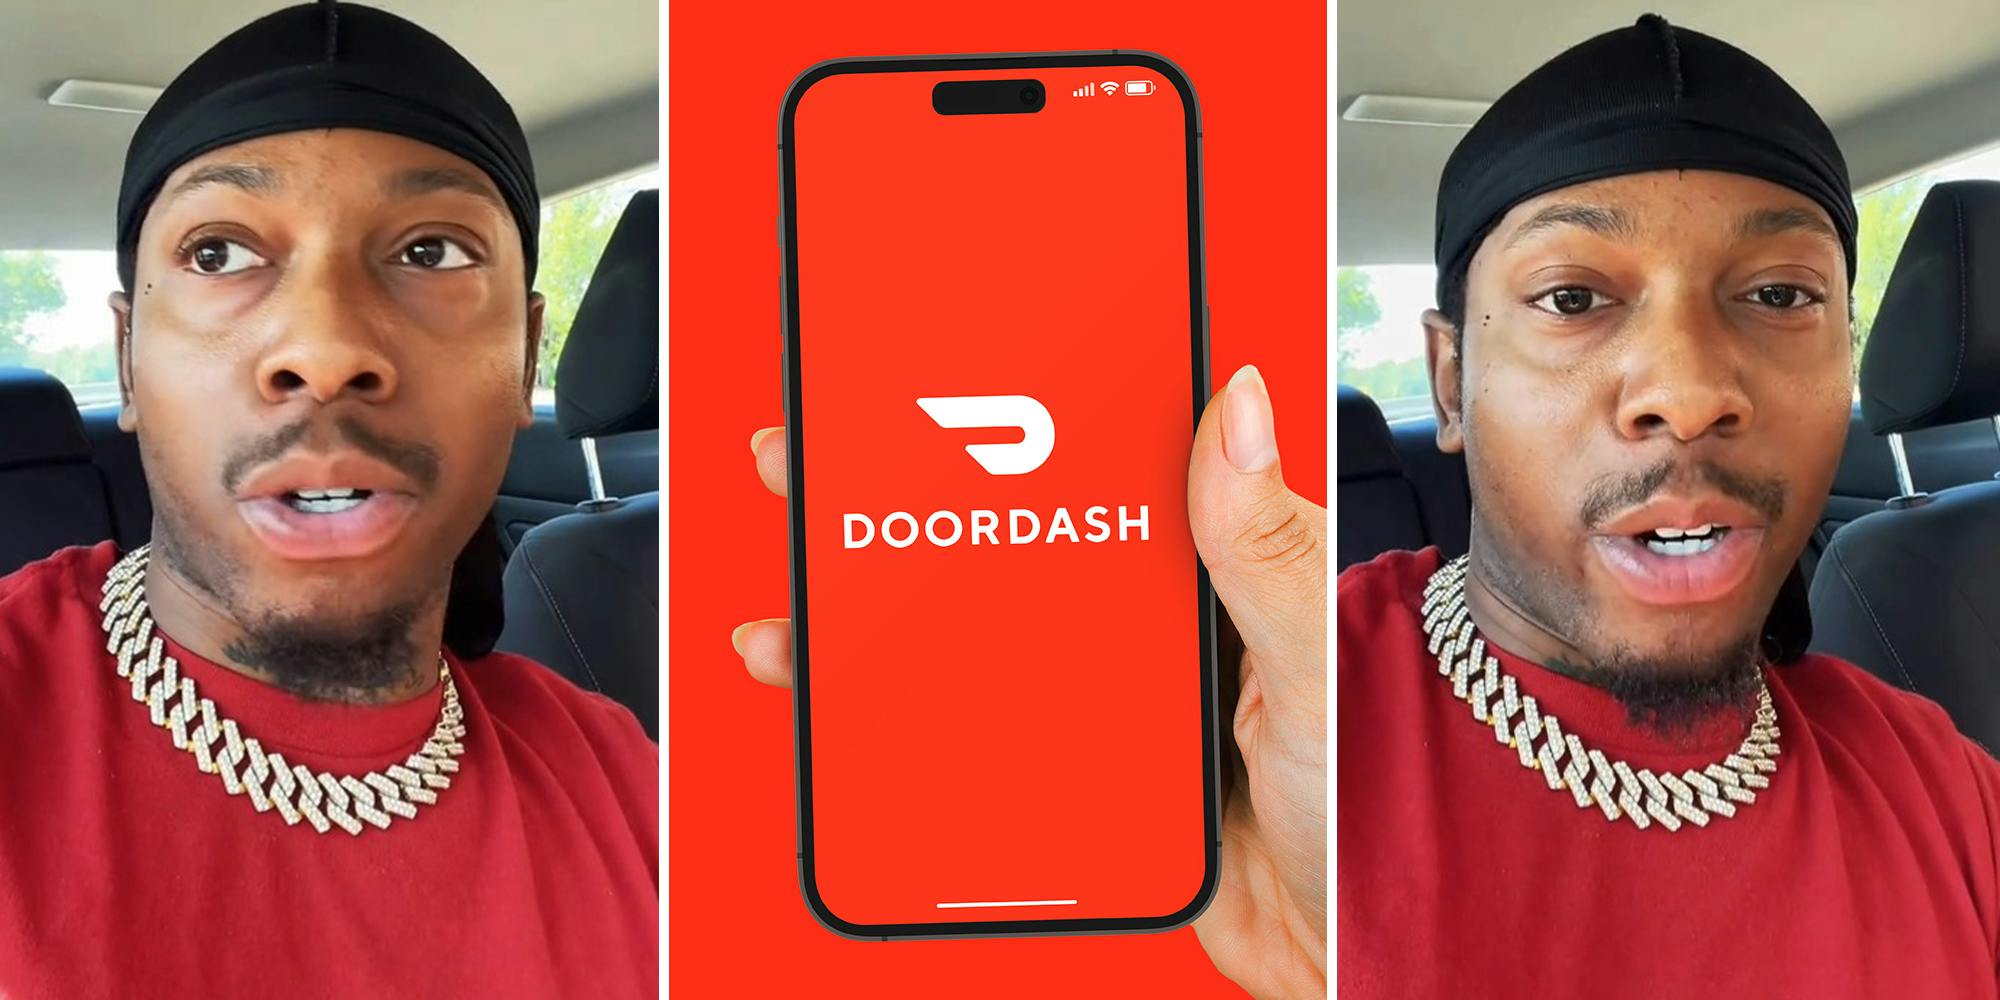 ‘Be careful’: DoorDash driver says someone placed an order for a single sauce packet from Taco Bell. He then realizes why